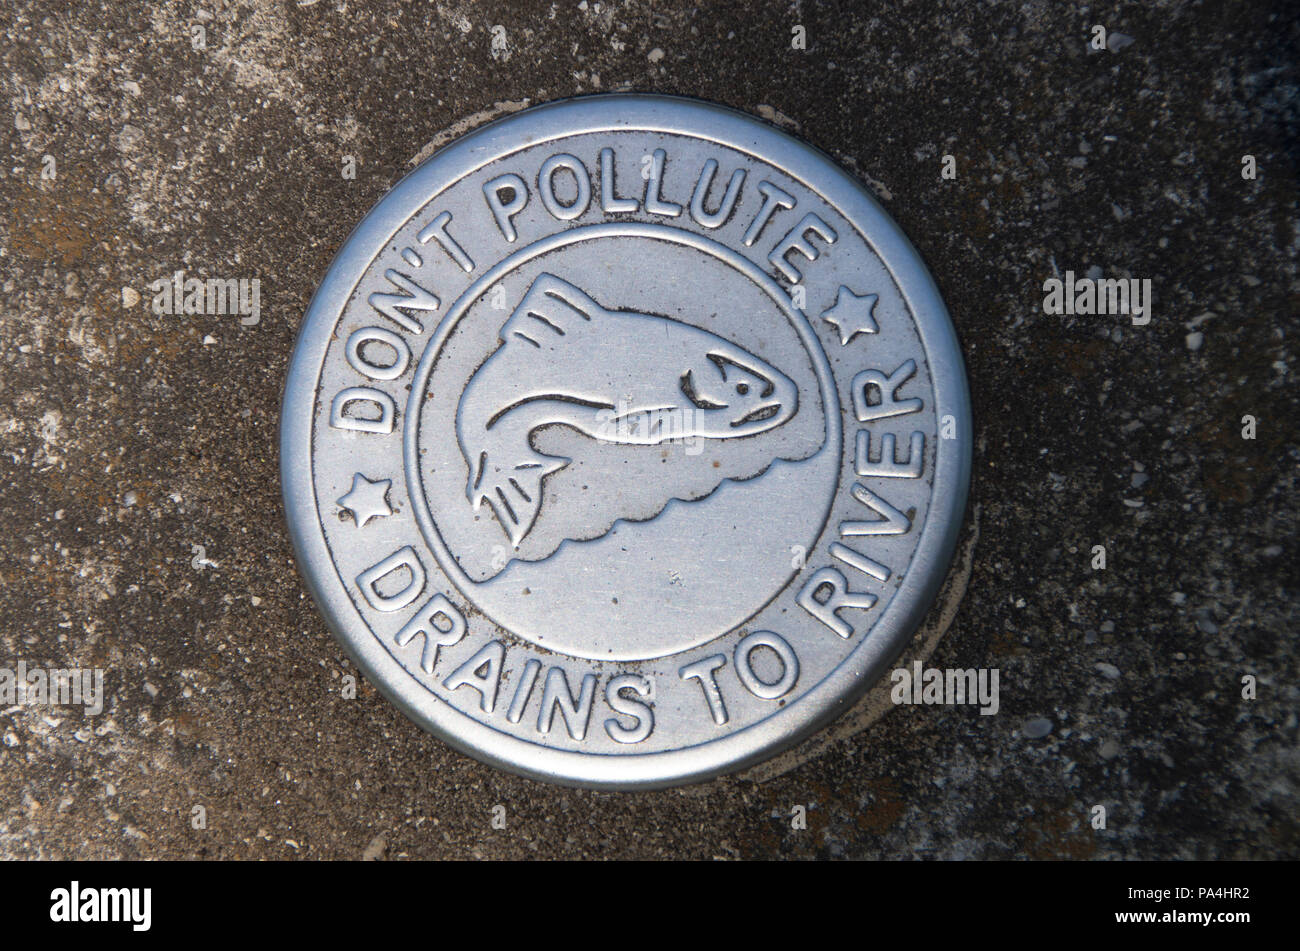 A sign warning of possible pollution to a waterway along a path near a park in Wilmington, North Carolina. Stock Photo